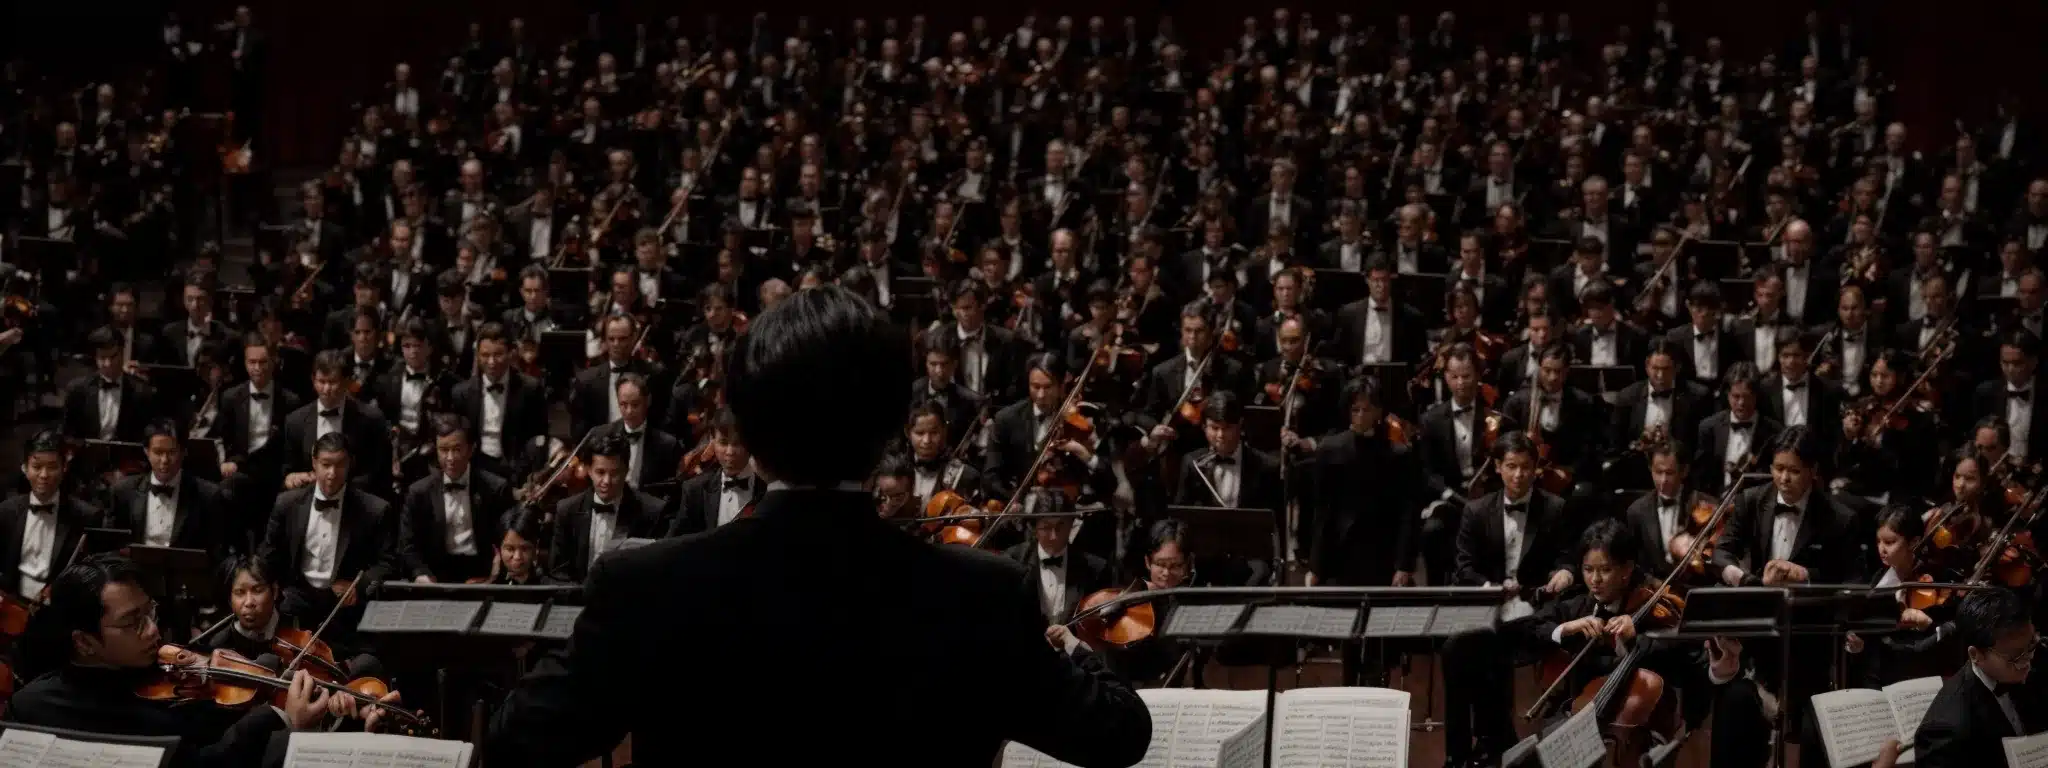 A Conductor Stands Before An Orchestra, Poised To Lead A Harmonious Performance.